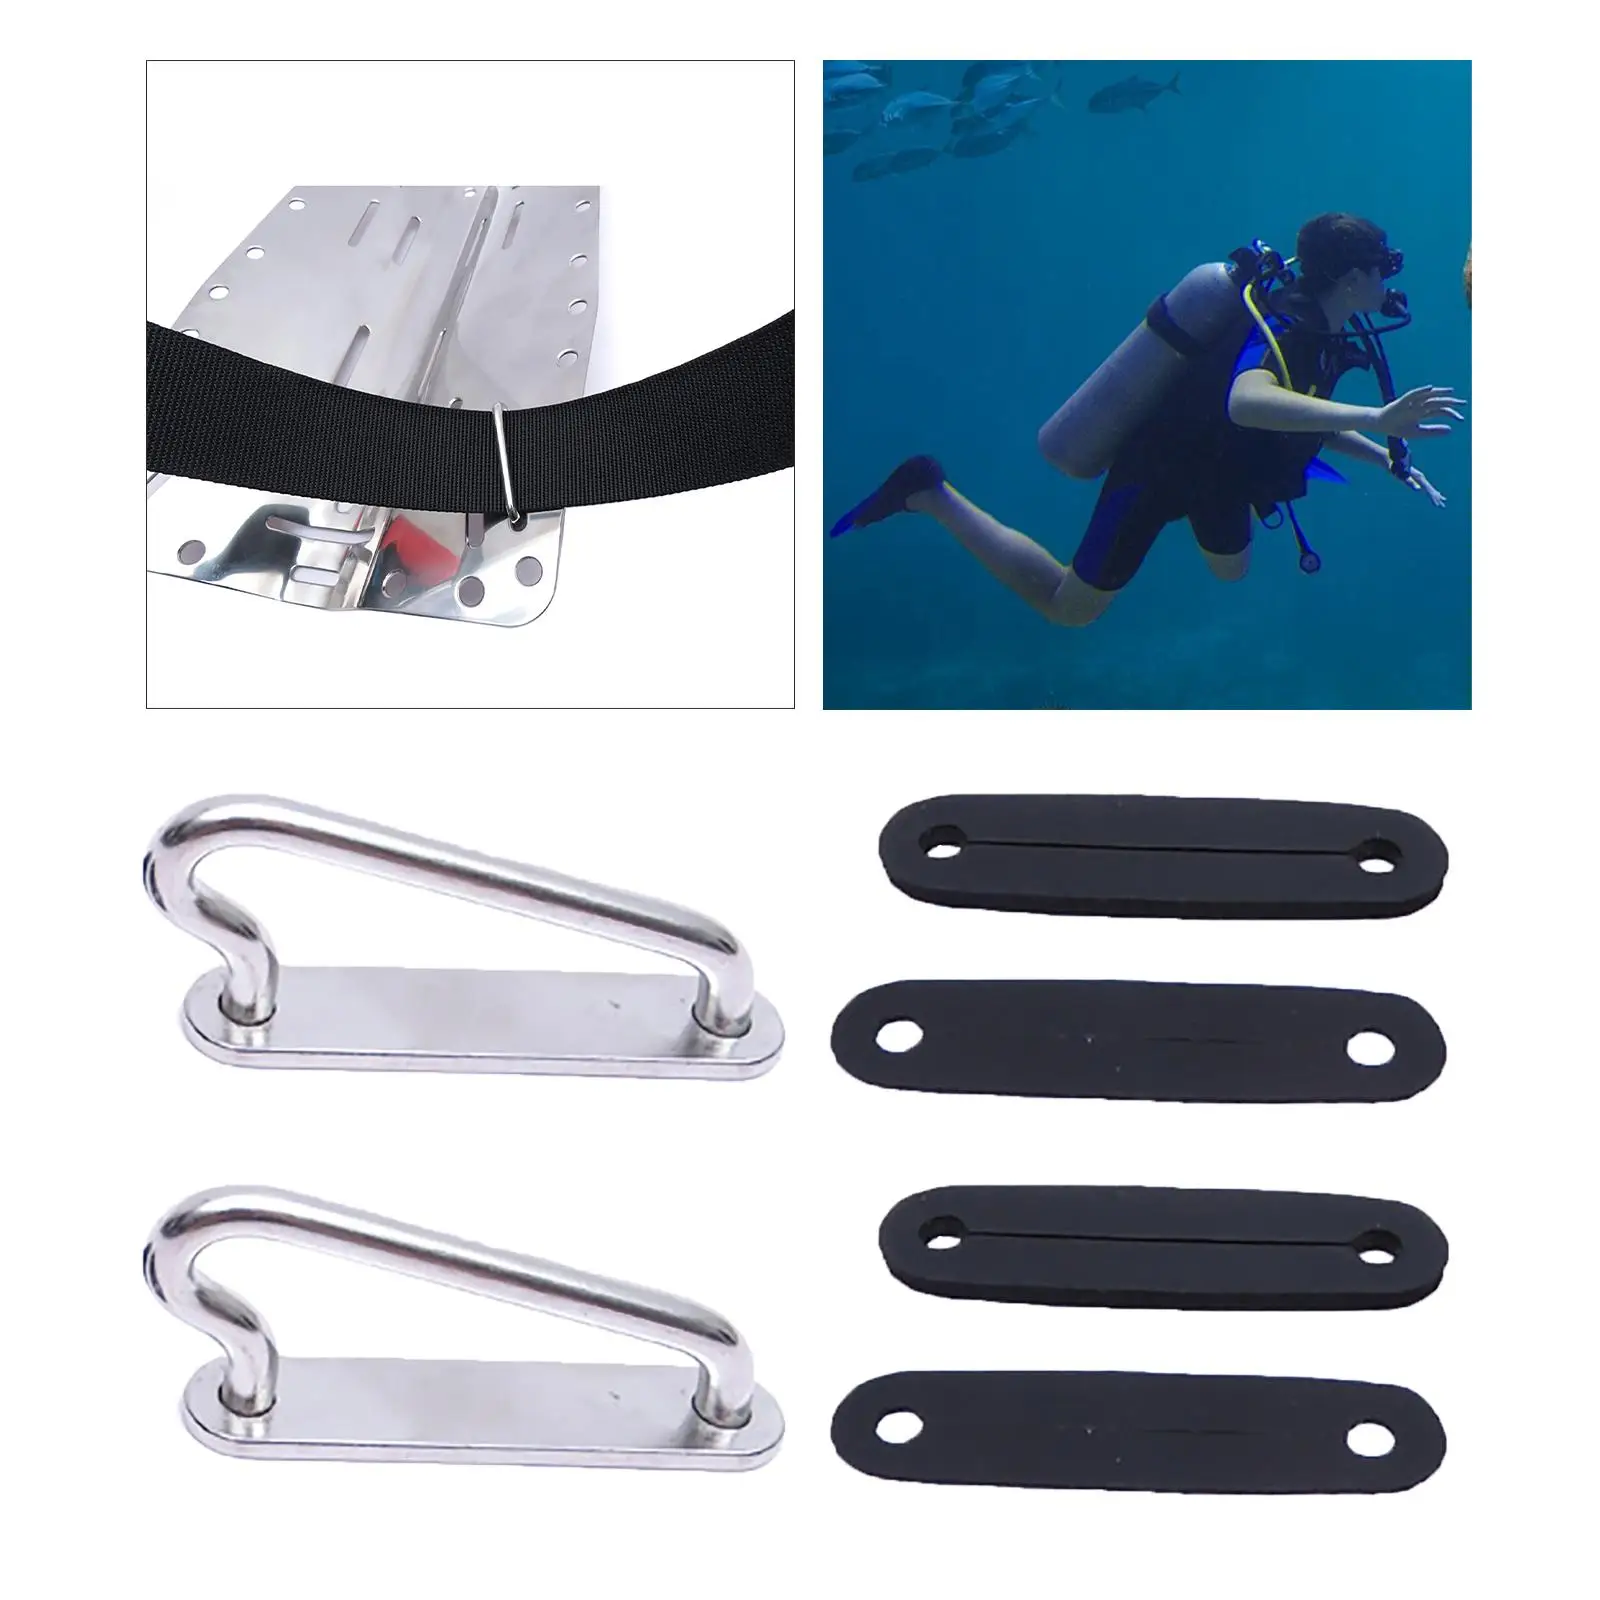 Weight  Keeper, Slider Buckle and Rubber Pad Underwater Scuba Diving Weight